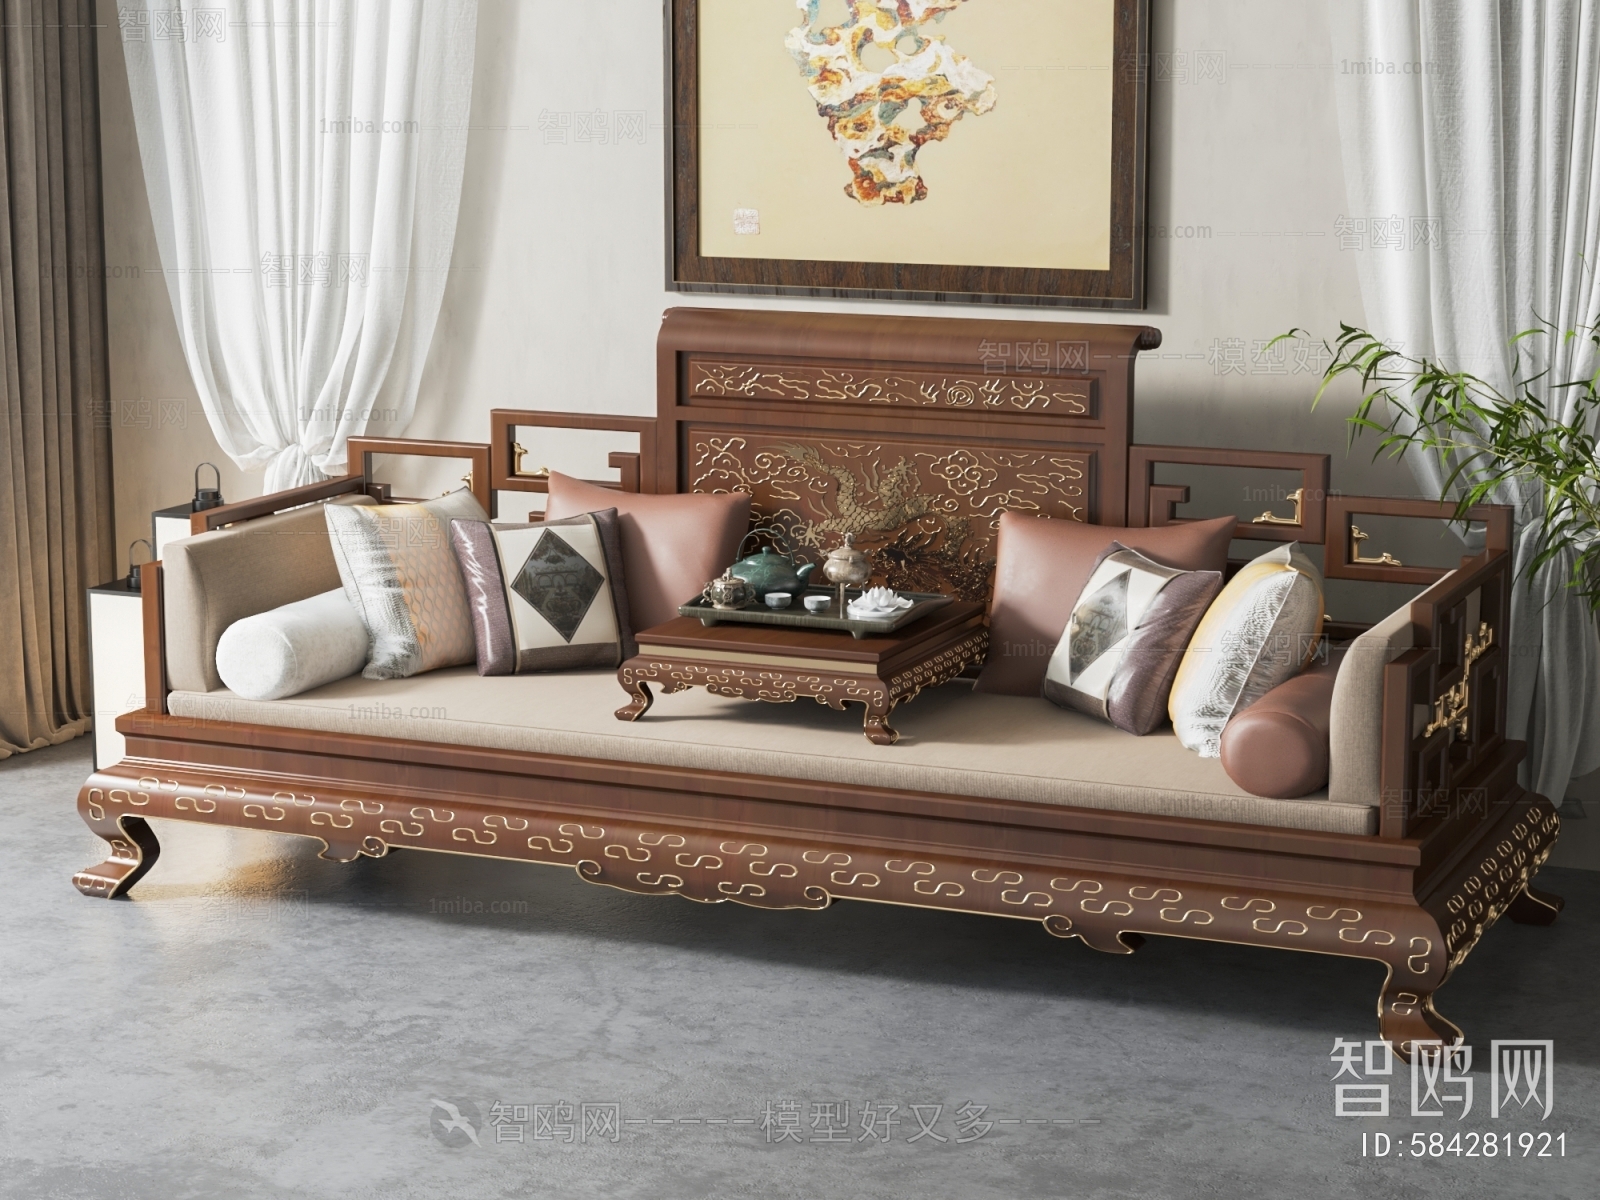 Chinese Style Arhat Bed